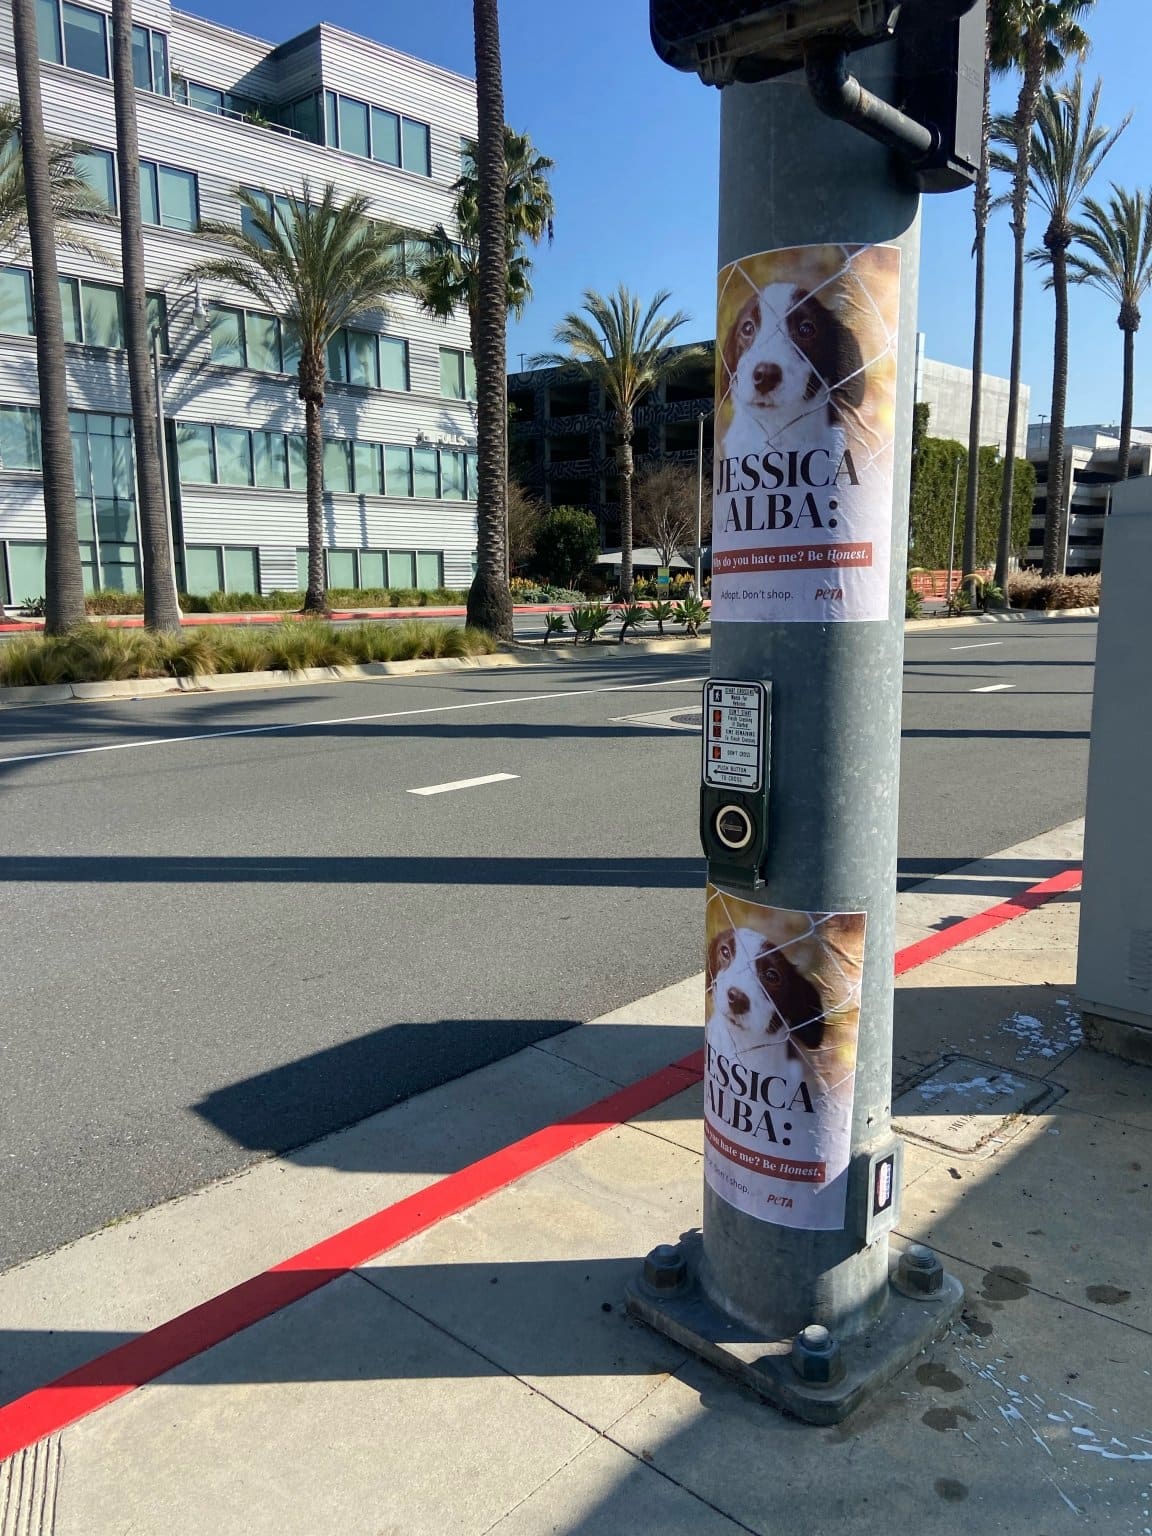 In January 2022, PETA (People for the Ethical Treatment of Animals) attacked Jessica Alba by plastering her Beverly Hills neighborhood in Los Angeles with posters blasting her decision to purchase two dogs instead of adopting